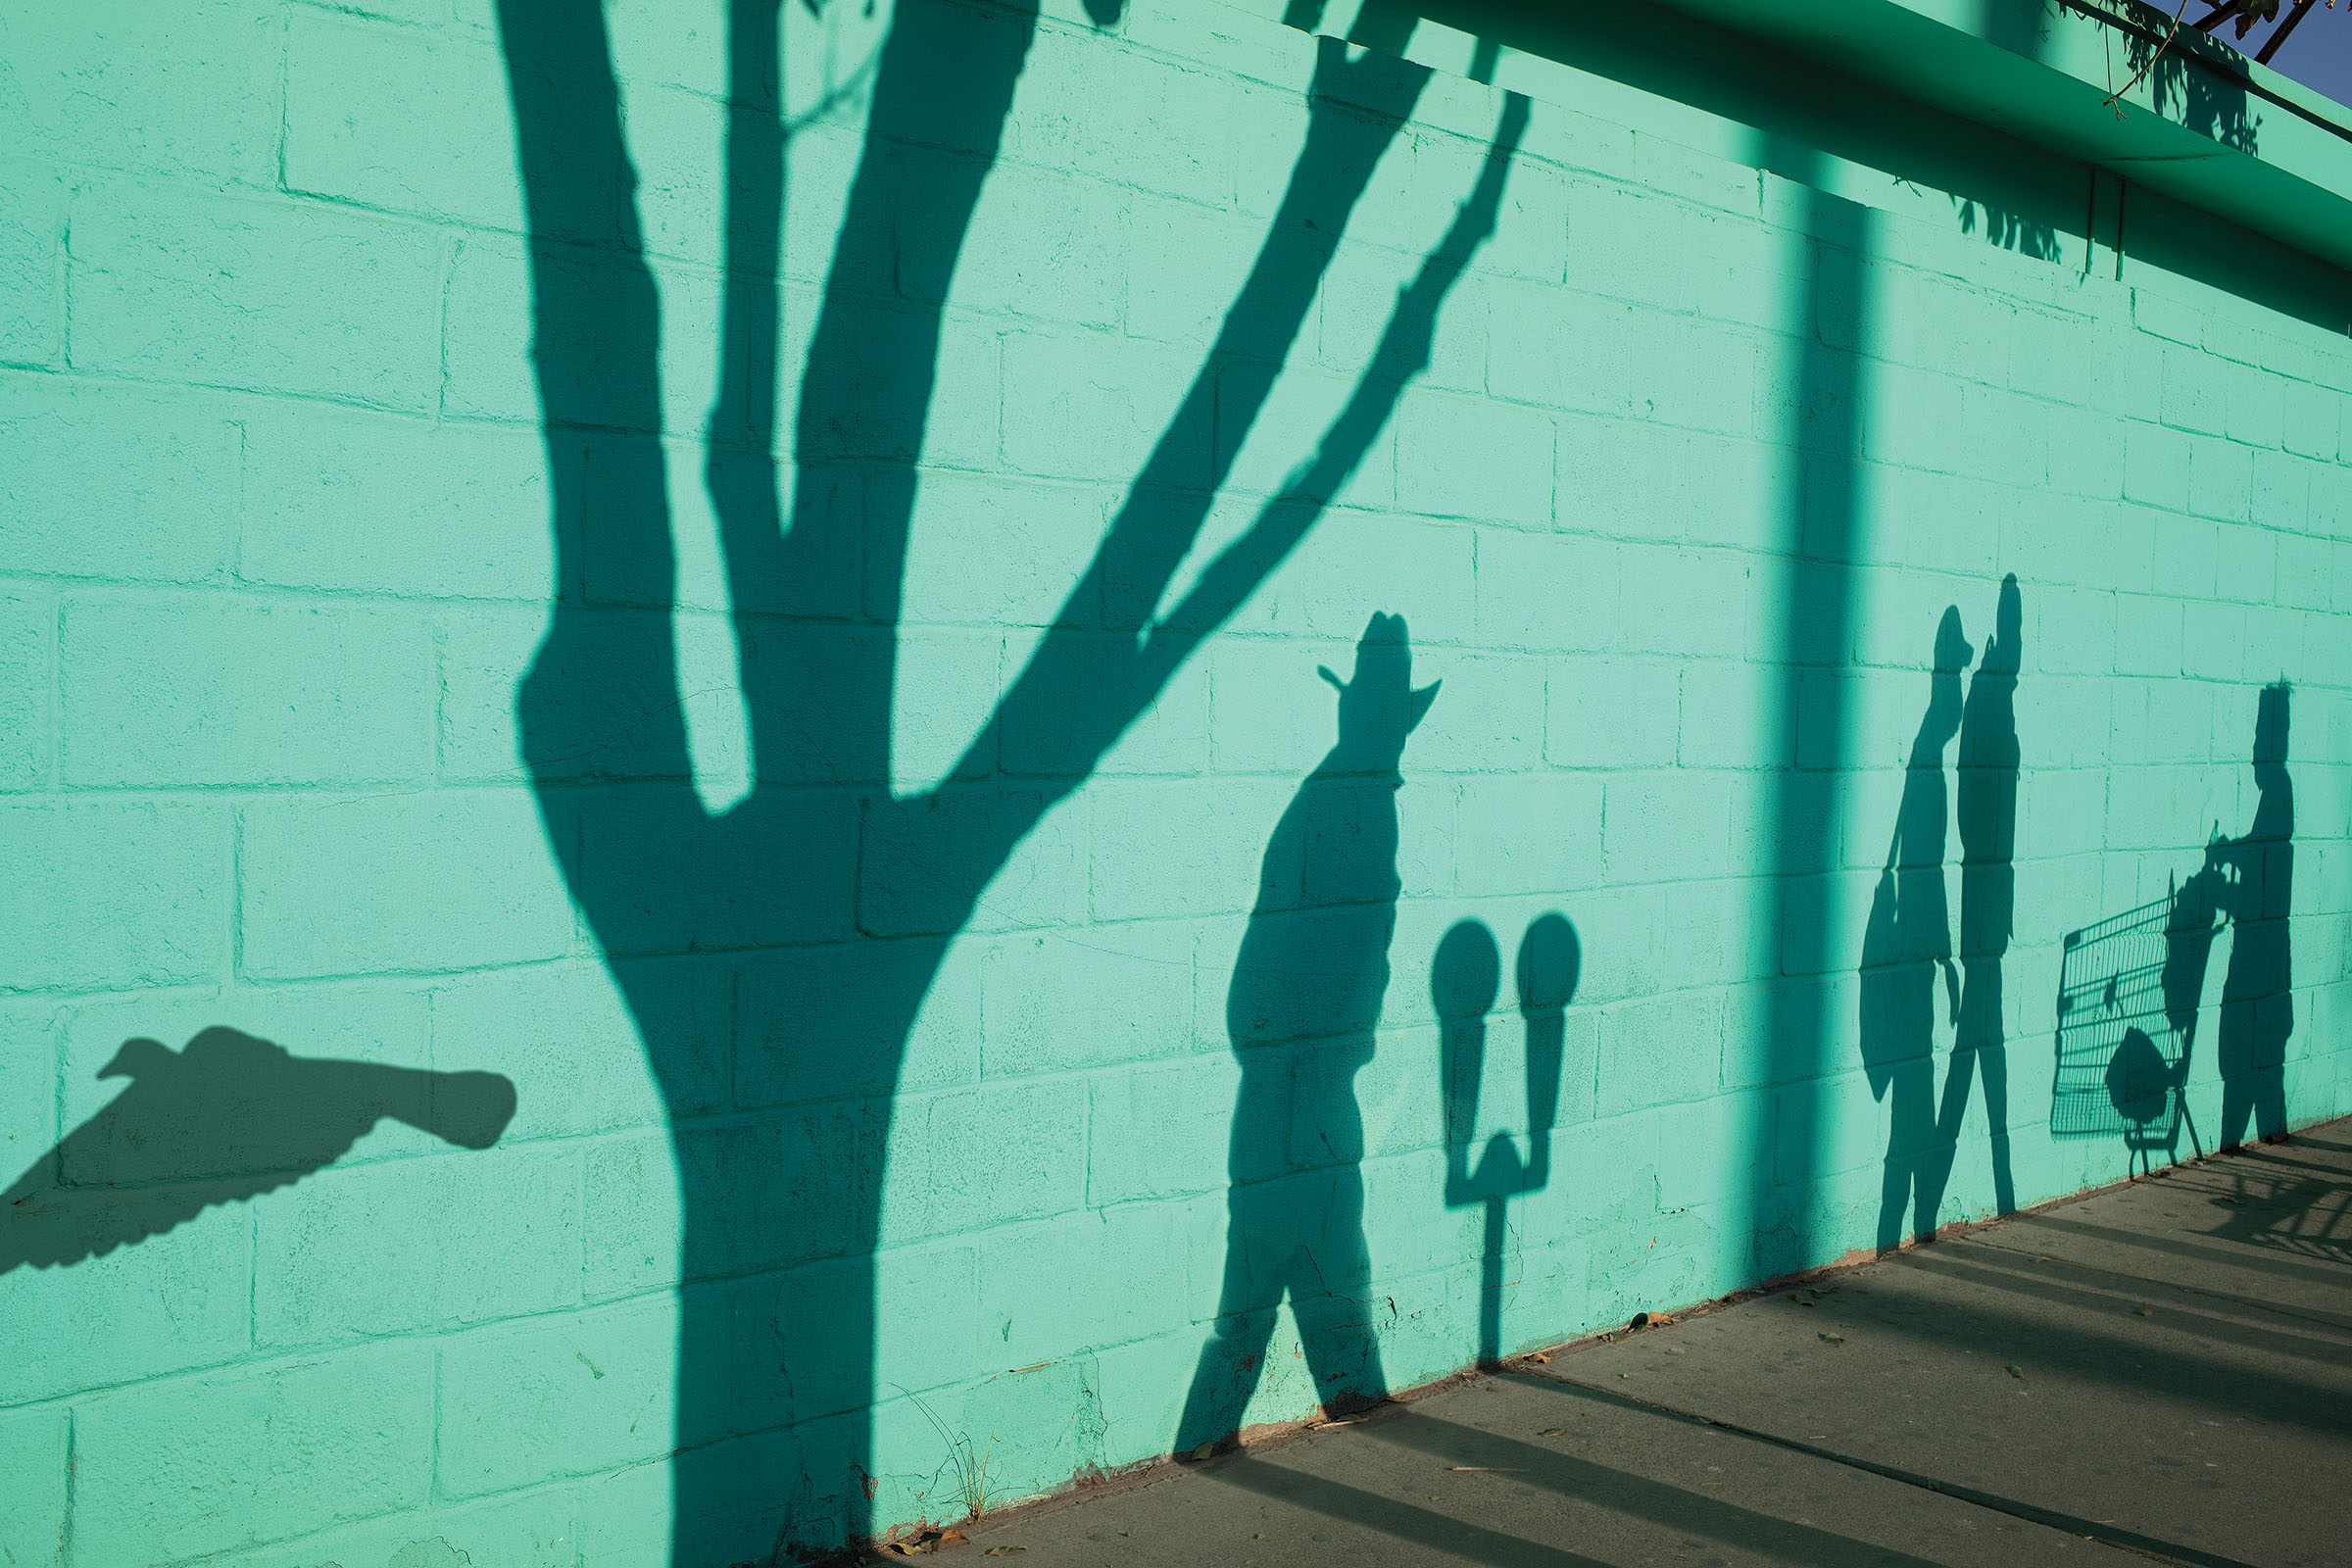 A green wall with dark green figures walking in what appear to be shadows